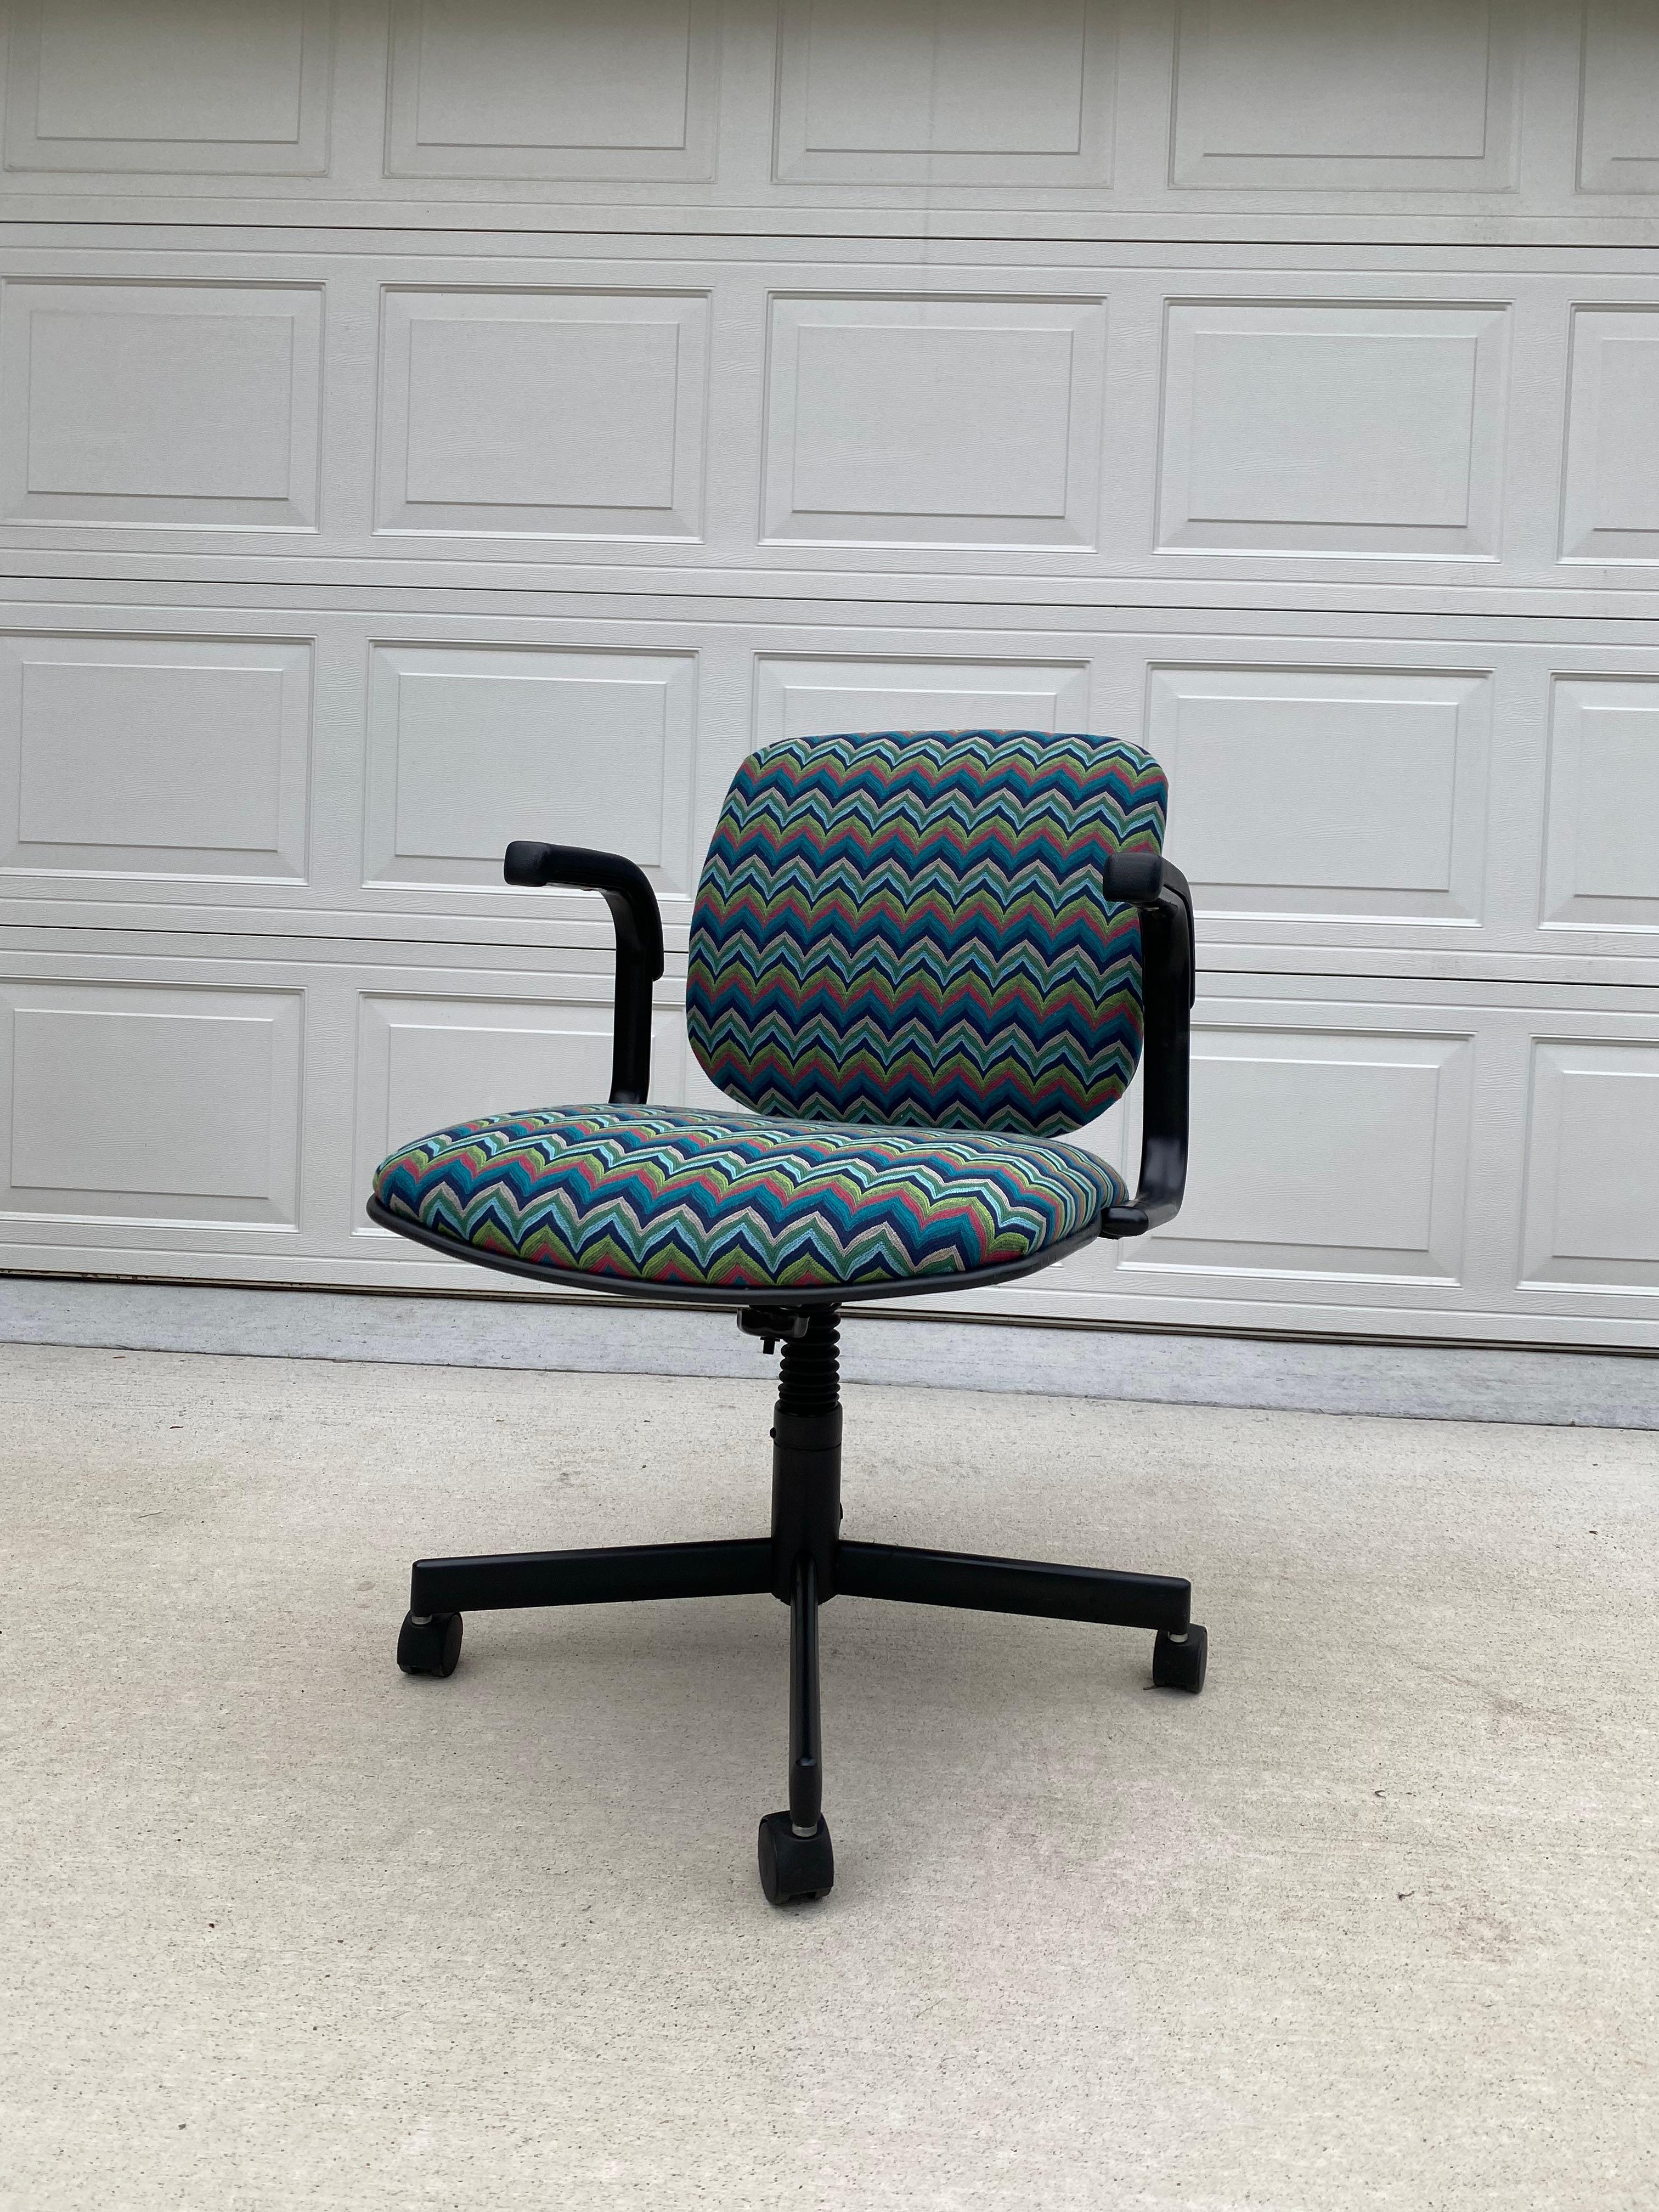 1980s Reupholstered Office Chair by Stylex, Inc. In Mid-Century Modern Fabric For Sale 2